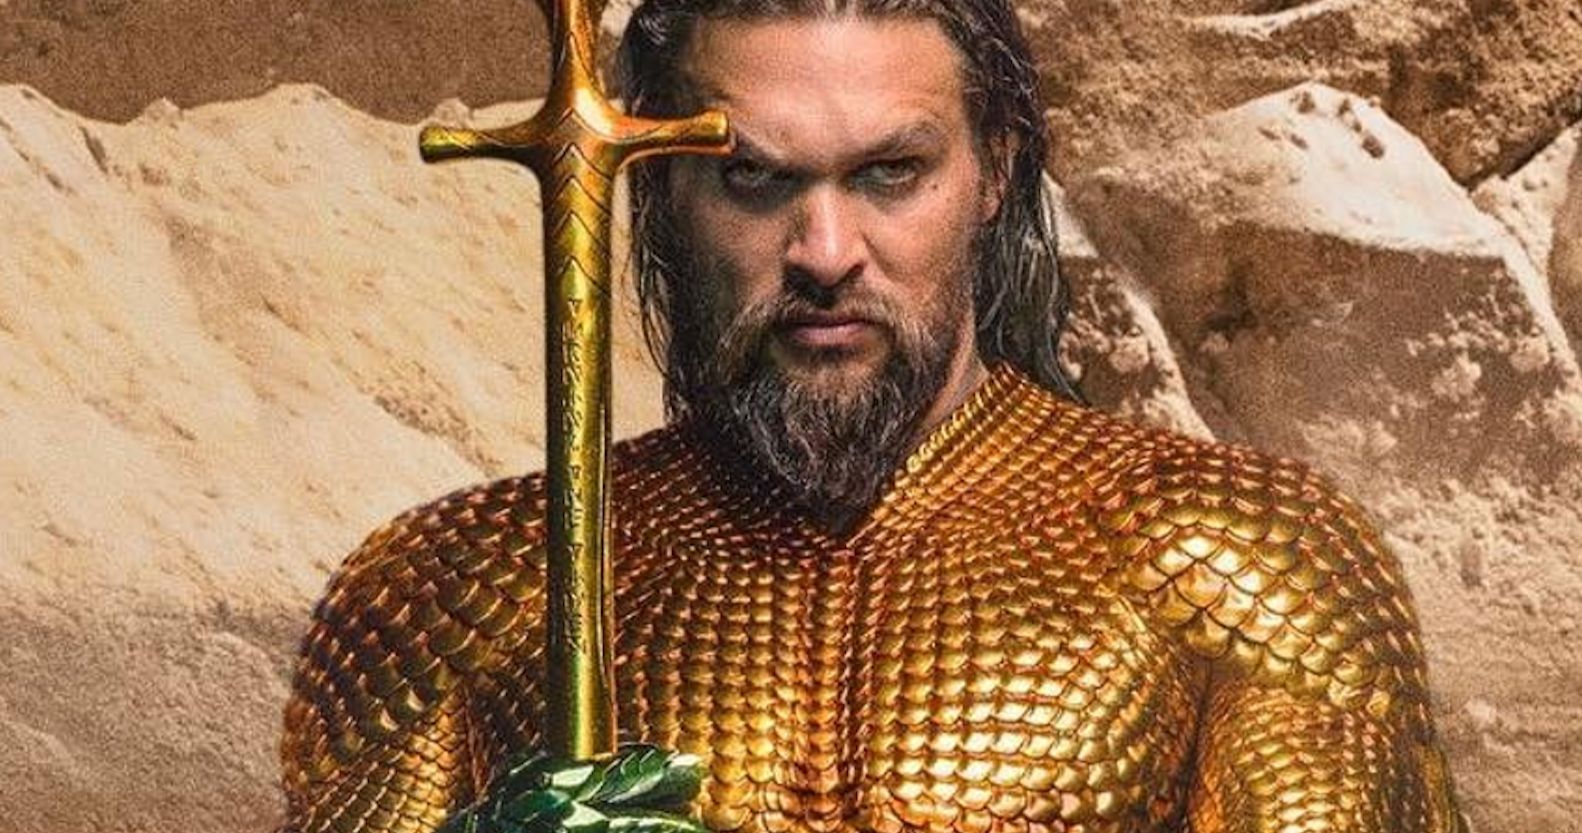 Aquaman 2 Has Higher Stakes, Bigger Action and a Lot of Comedy Teases Jason Momoa